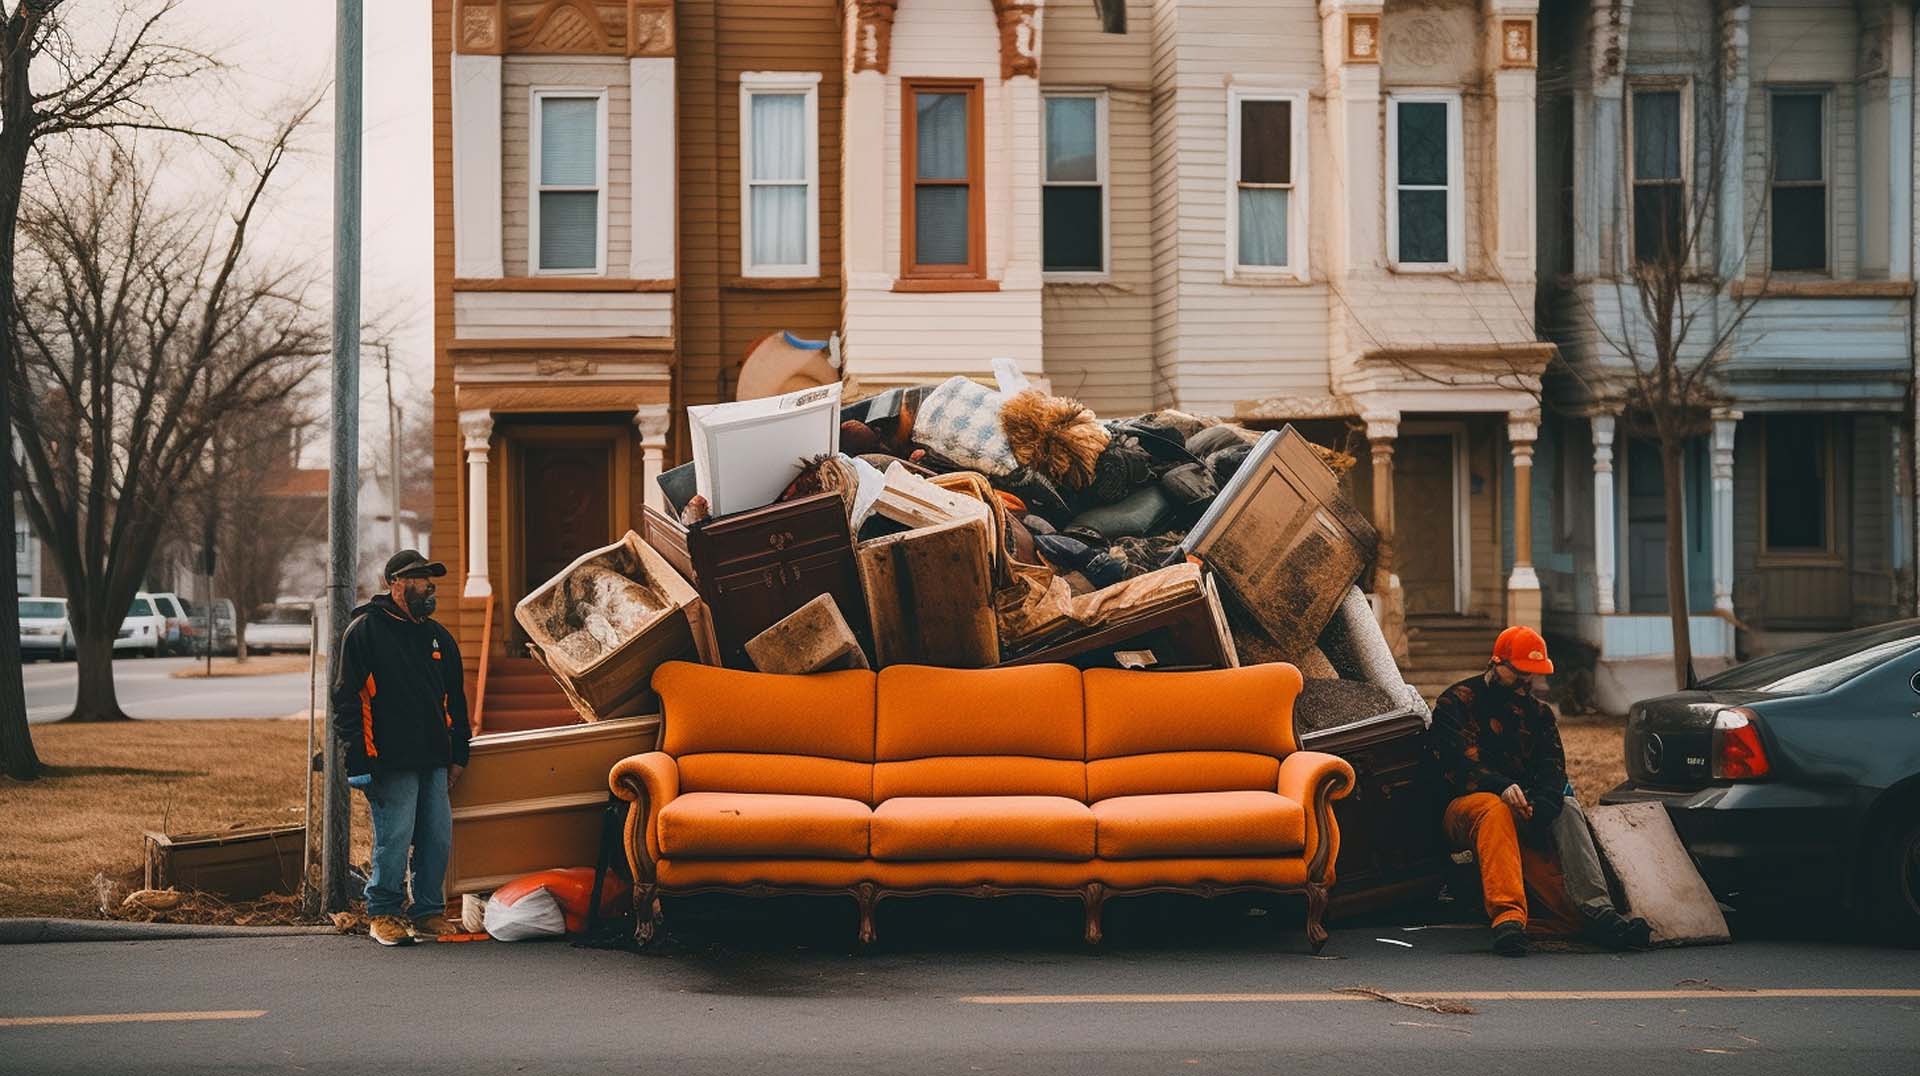 Residential Junk Removal Services in Montmagny